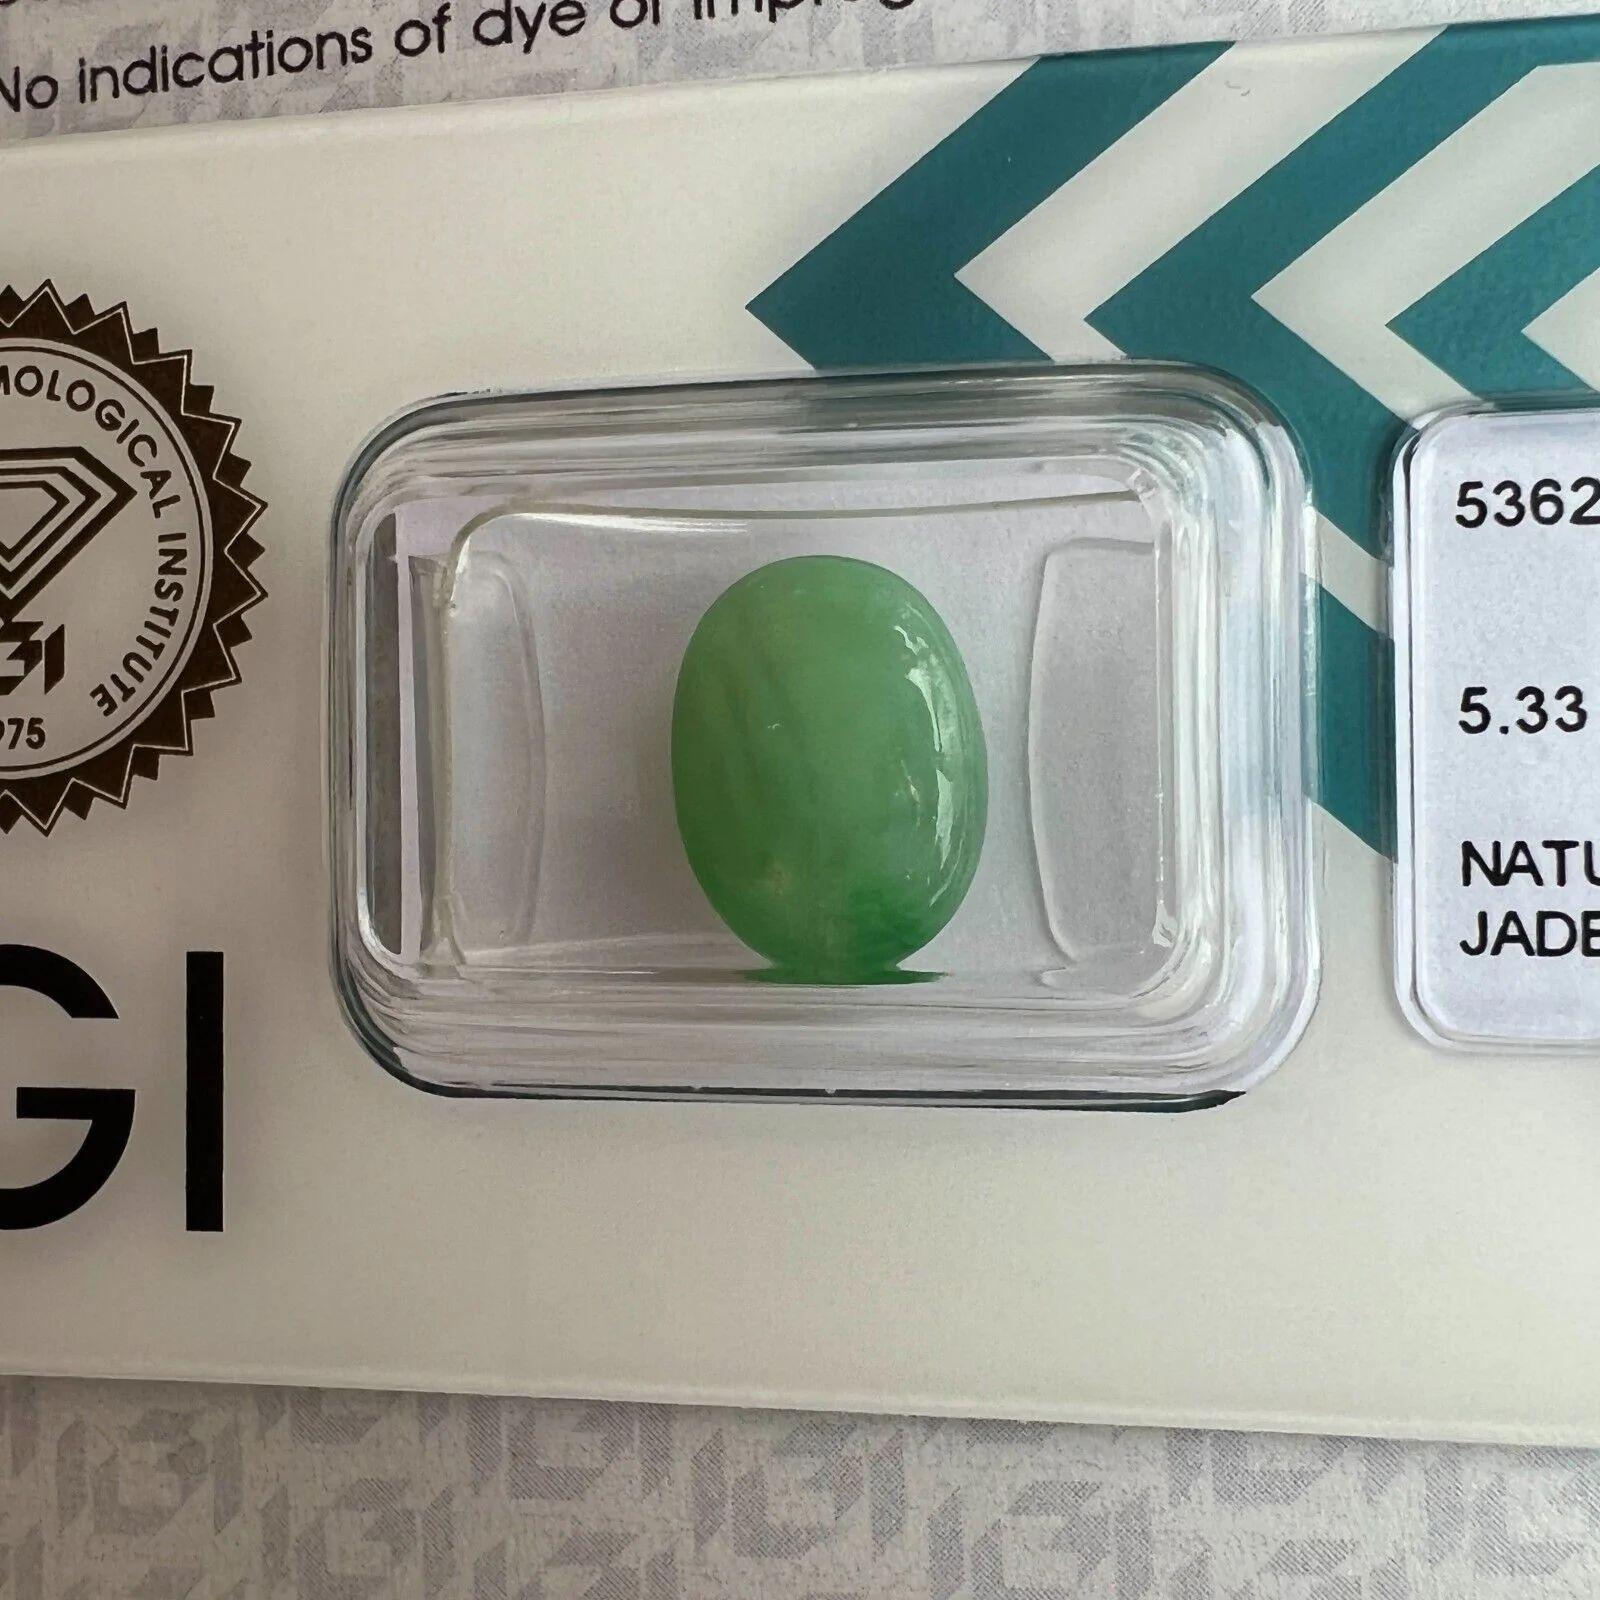 Rare 5.33ct IGI Certified Jadeite Jade ‘A’ Grade Green Oval Cabochon Blister Gem

IGI Blister Sealed Untreated A Grade Jadeite Gemstone.
5.33 Carat with an excellent oval cabochon cut and bright green colour. Fully certified by IGI in Antwerp, one